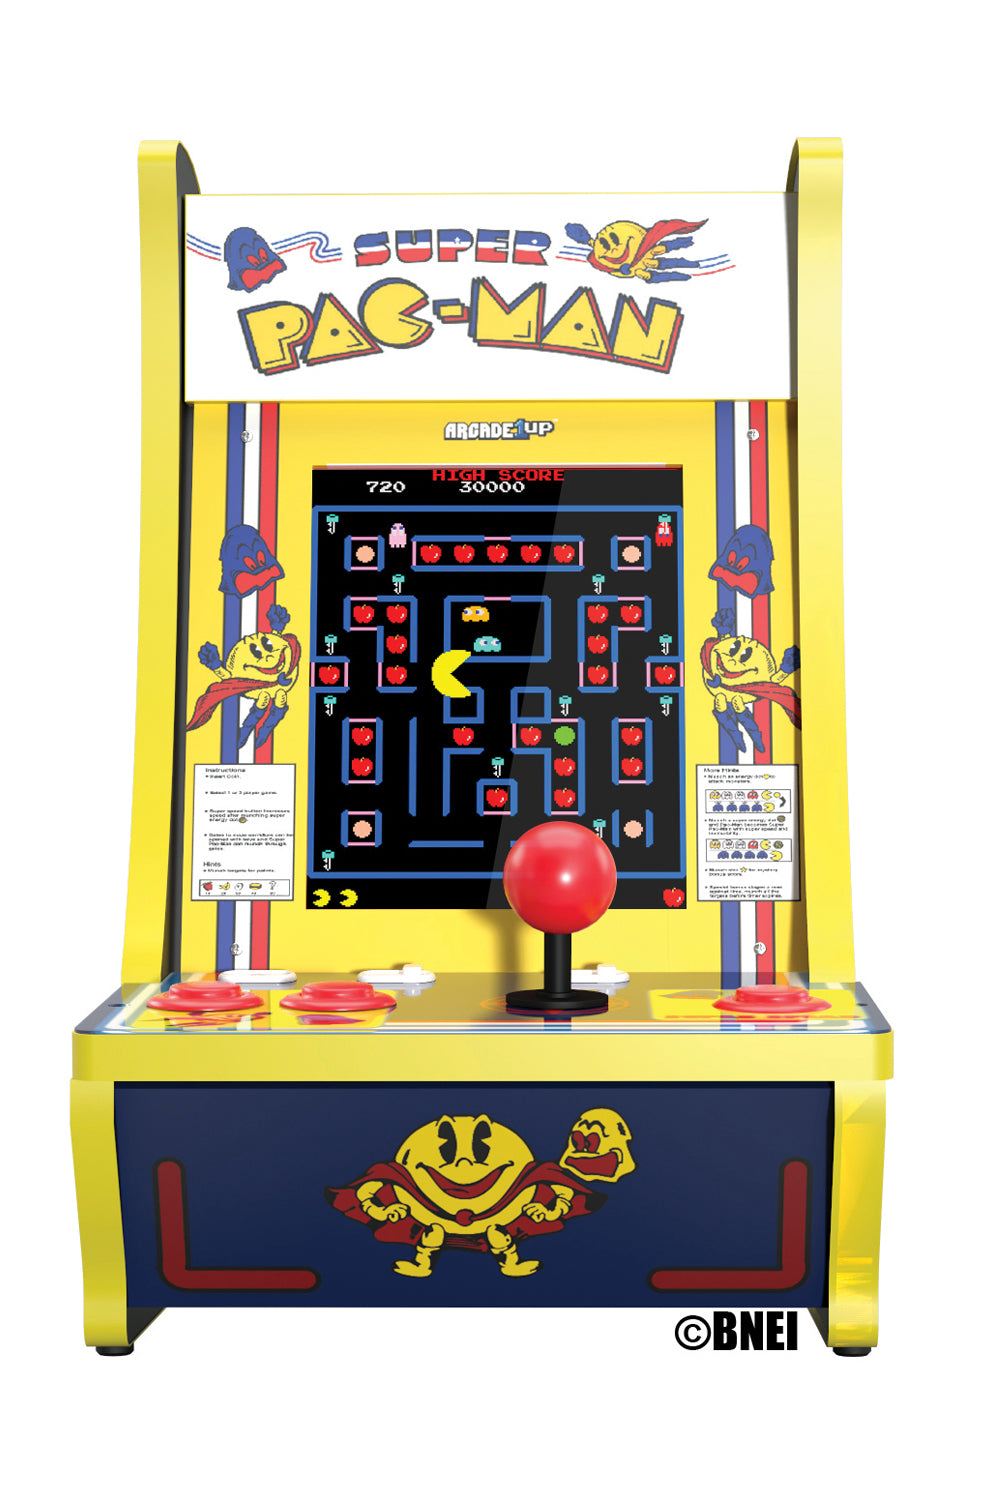 arcade1up 4-in-1 partycade with pac-man dig dug galaga and galaxian